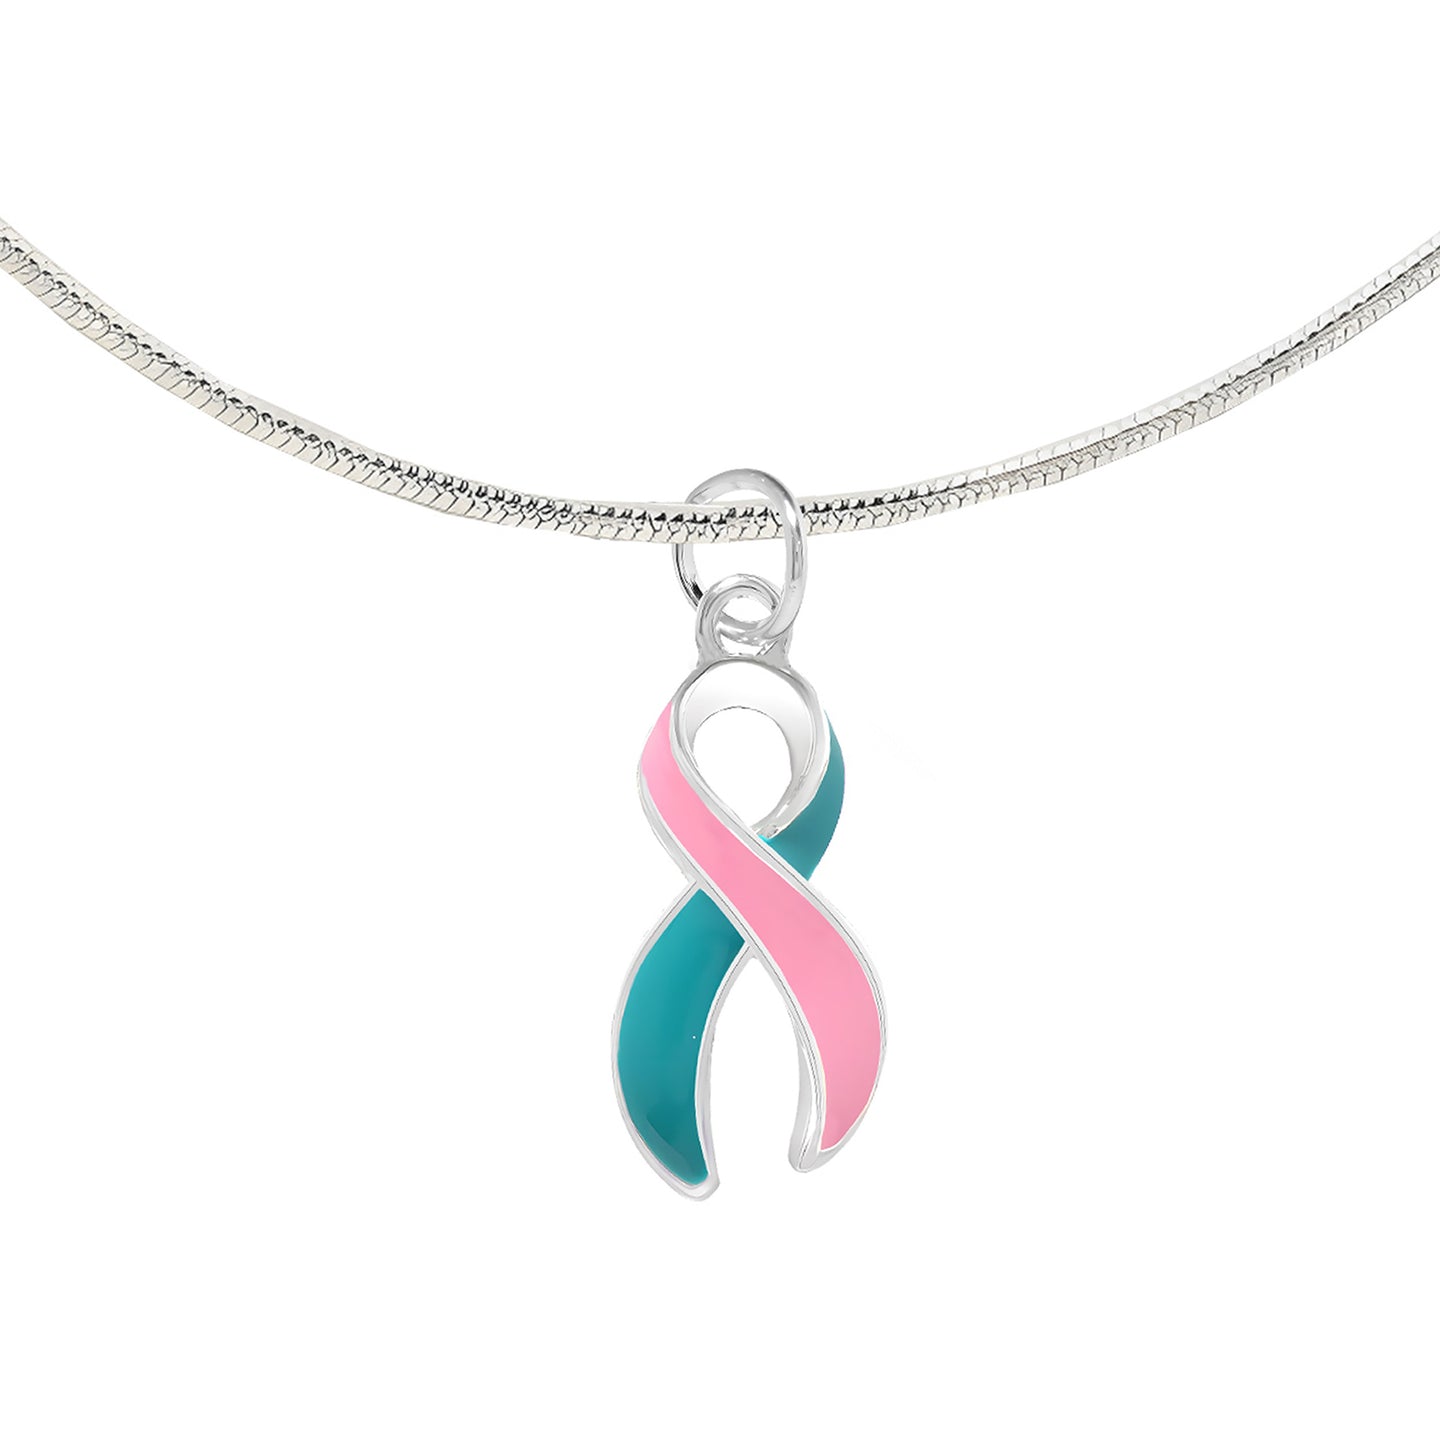 Large Pink & Teal Ribbon Necklaces - Fundraising For A Cause